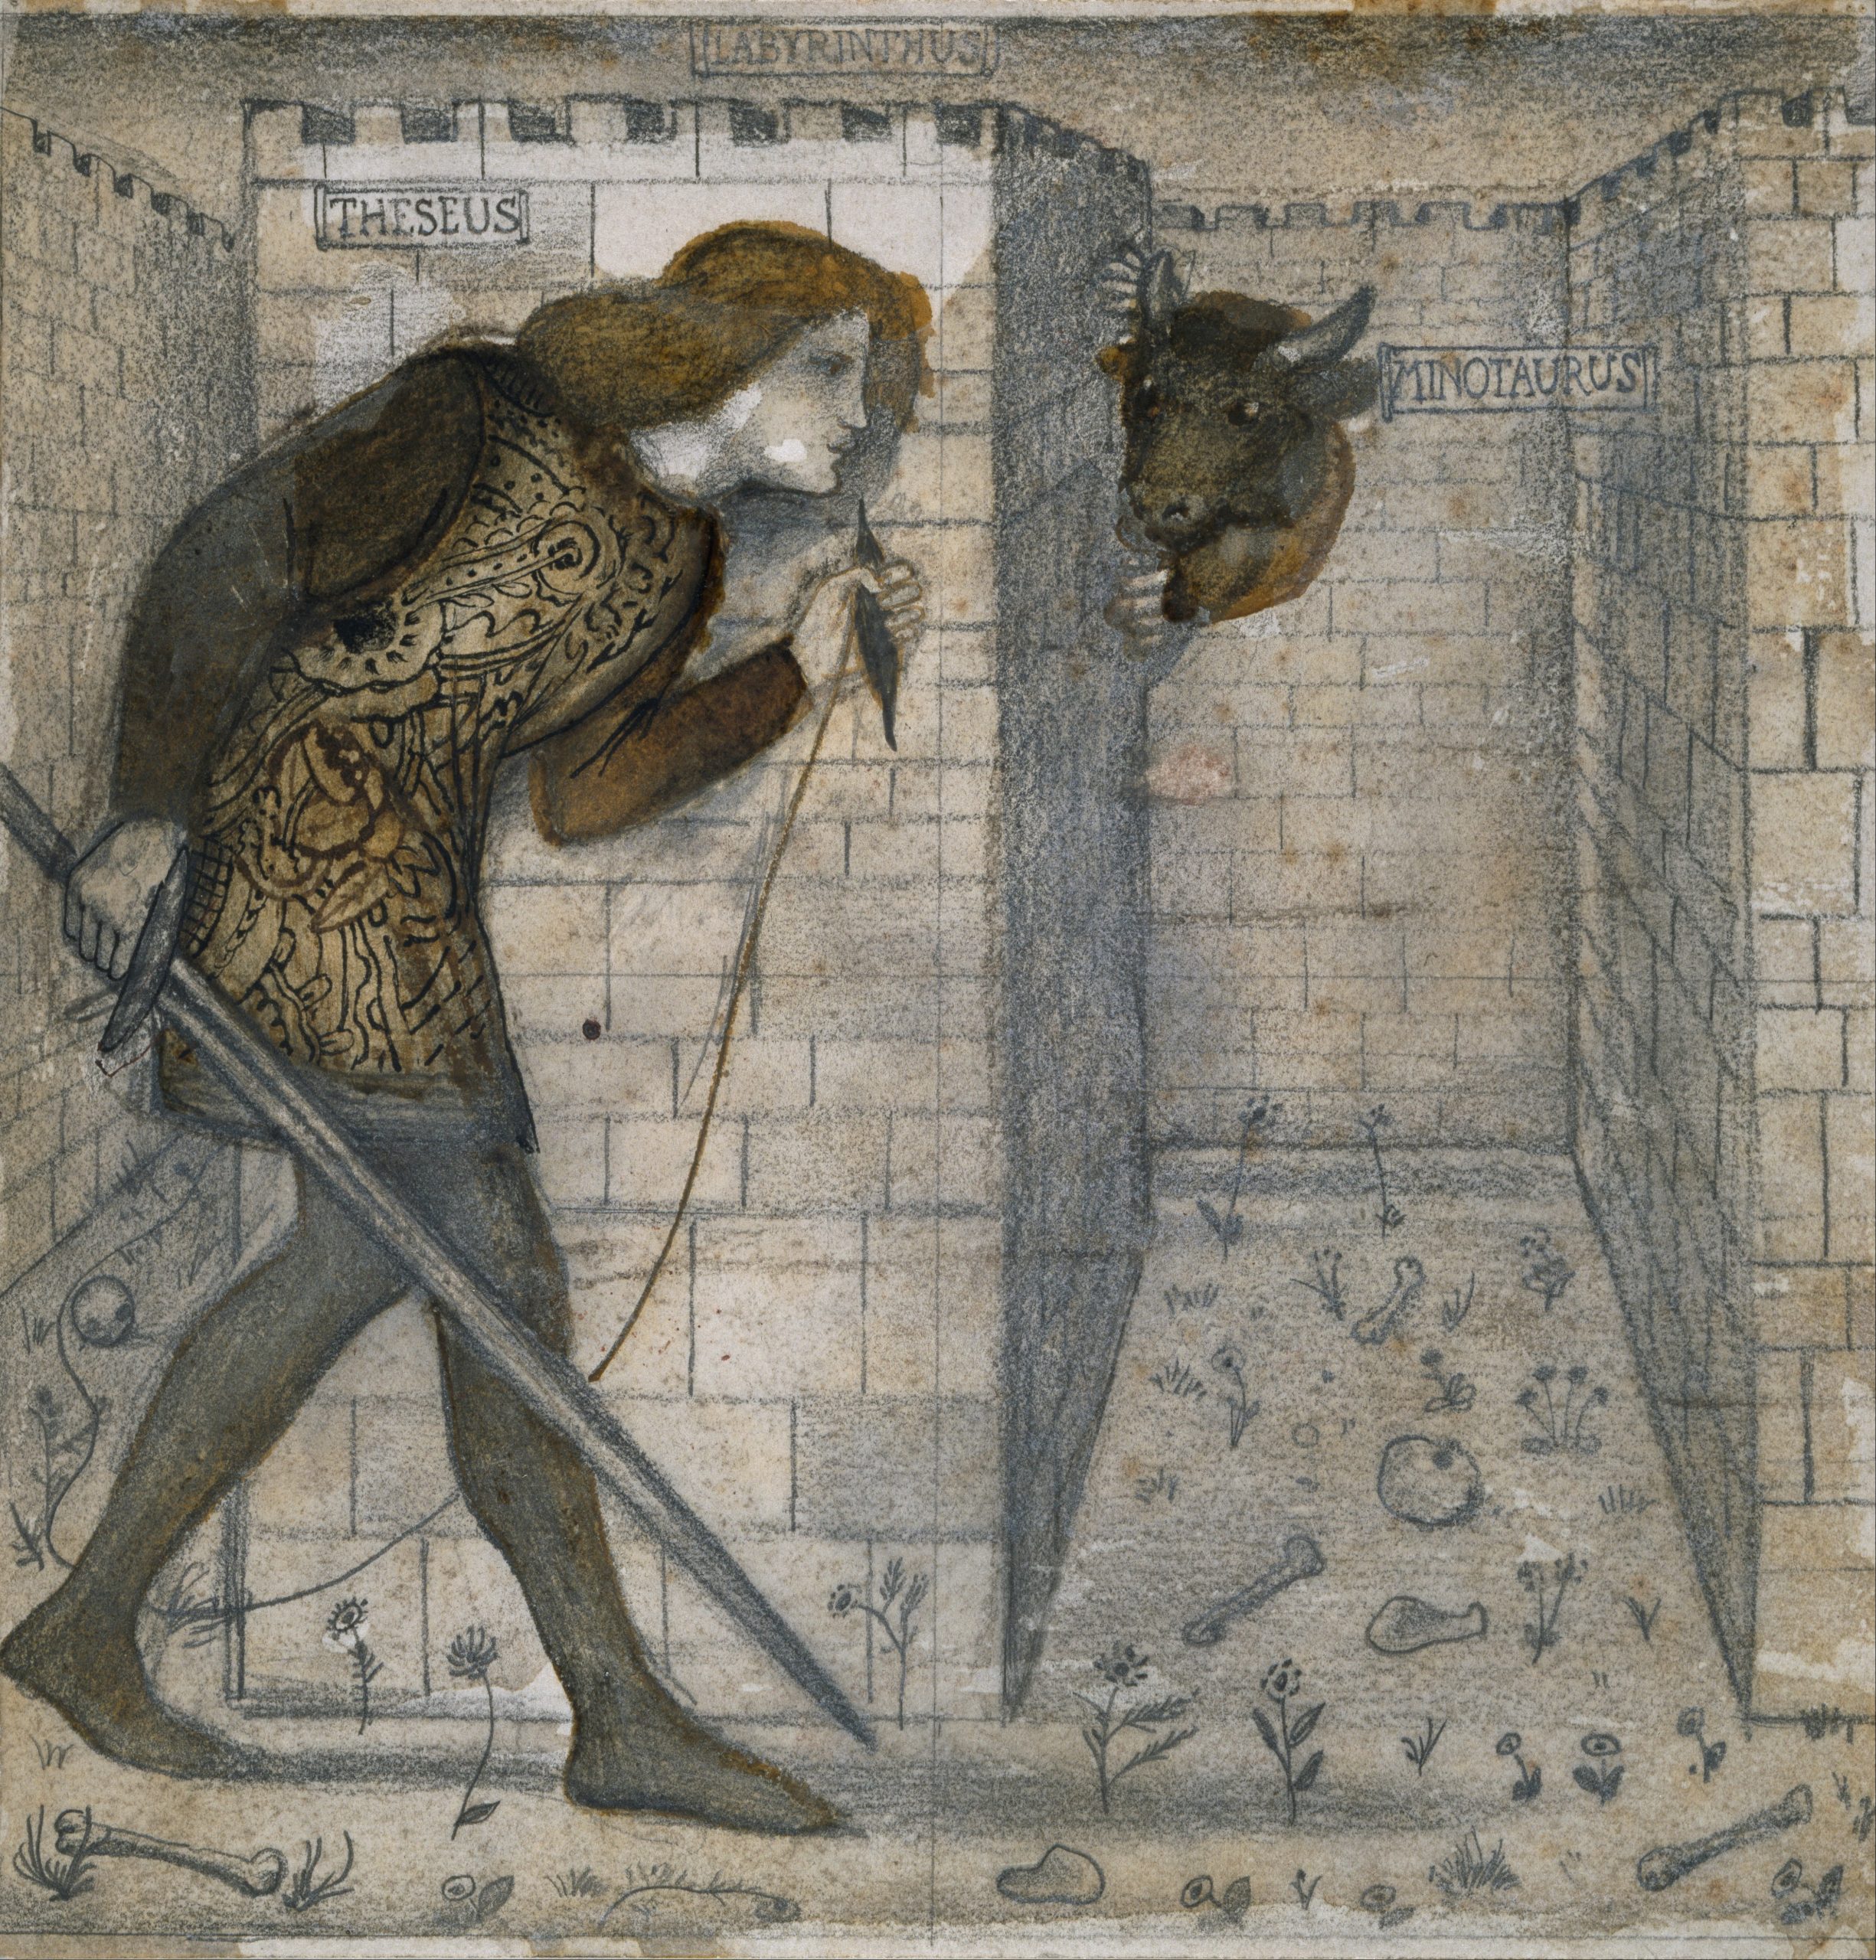 A man carrying a sword hides behind a wall while a minotaur hides behind another wall.